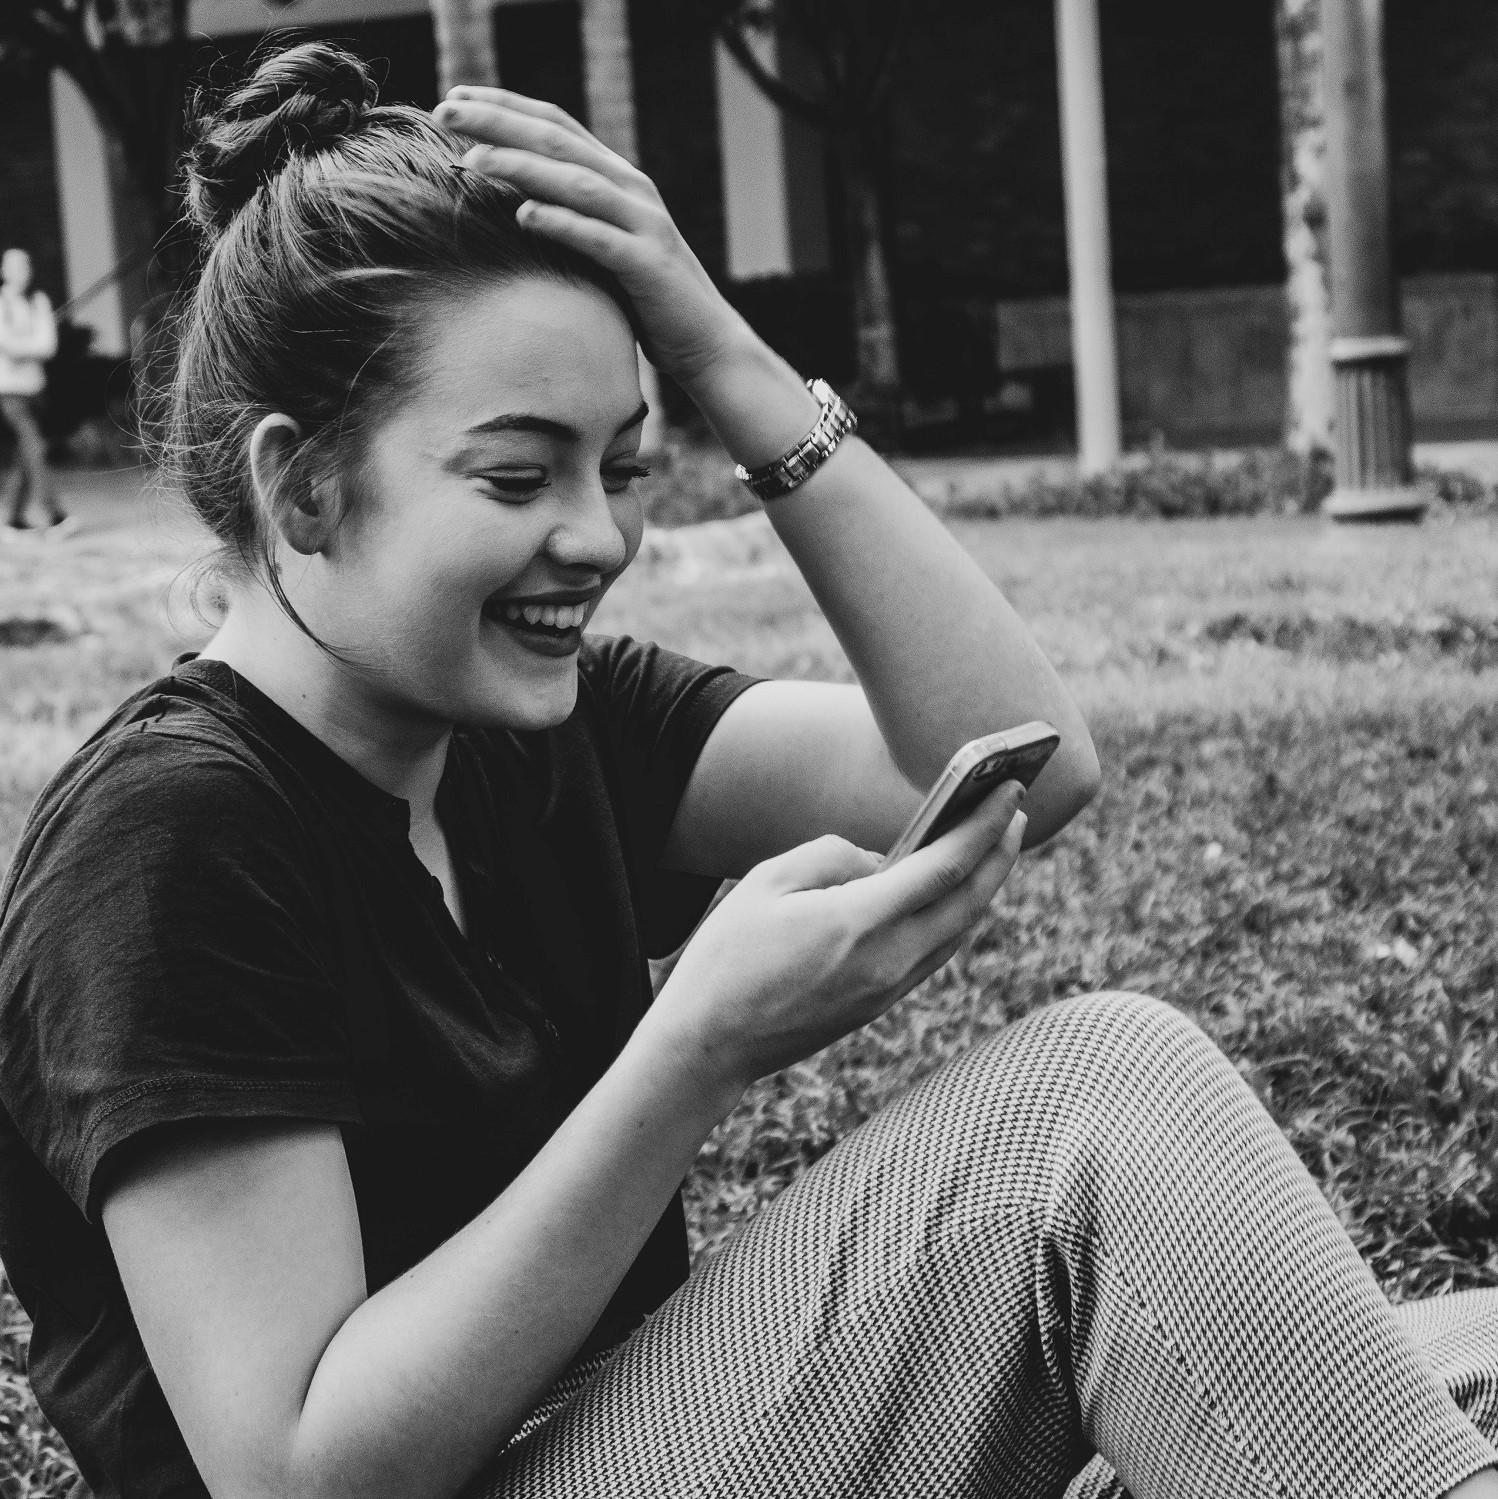 Woman laughing at phone: a funny dating profile and a witty profile description on dating apps like Bumble will make a woman laugh and desire you